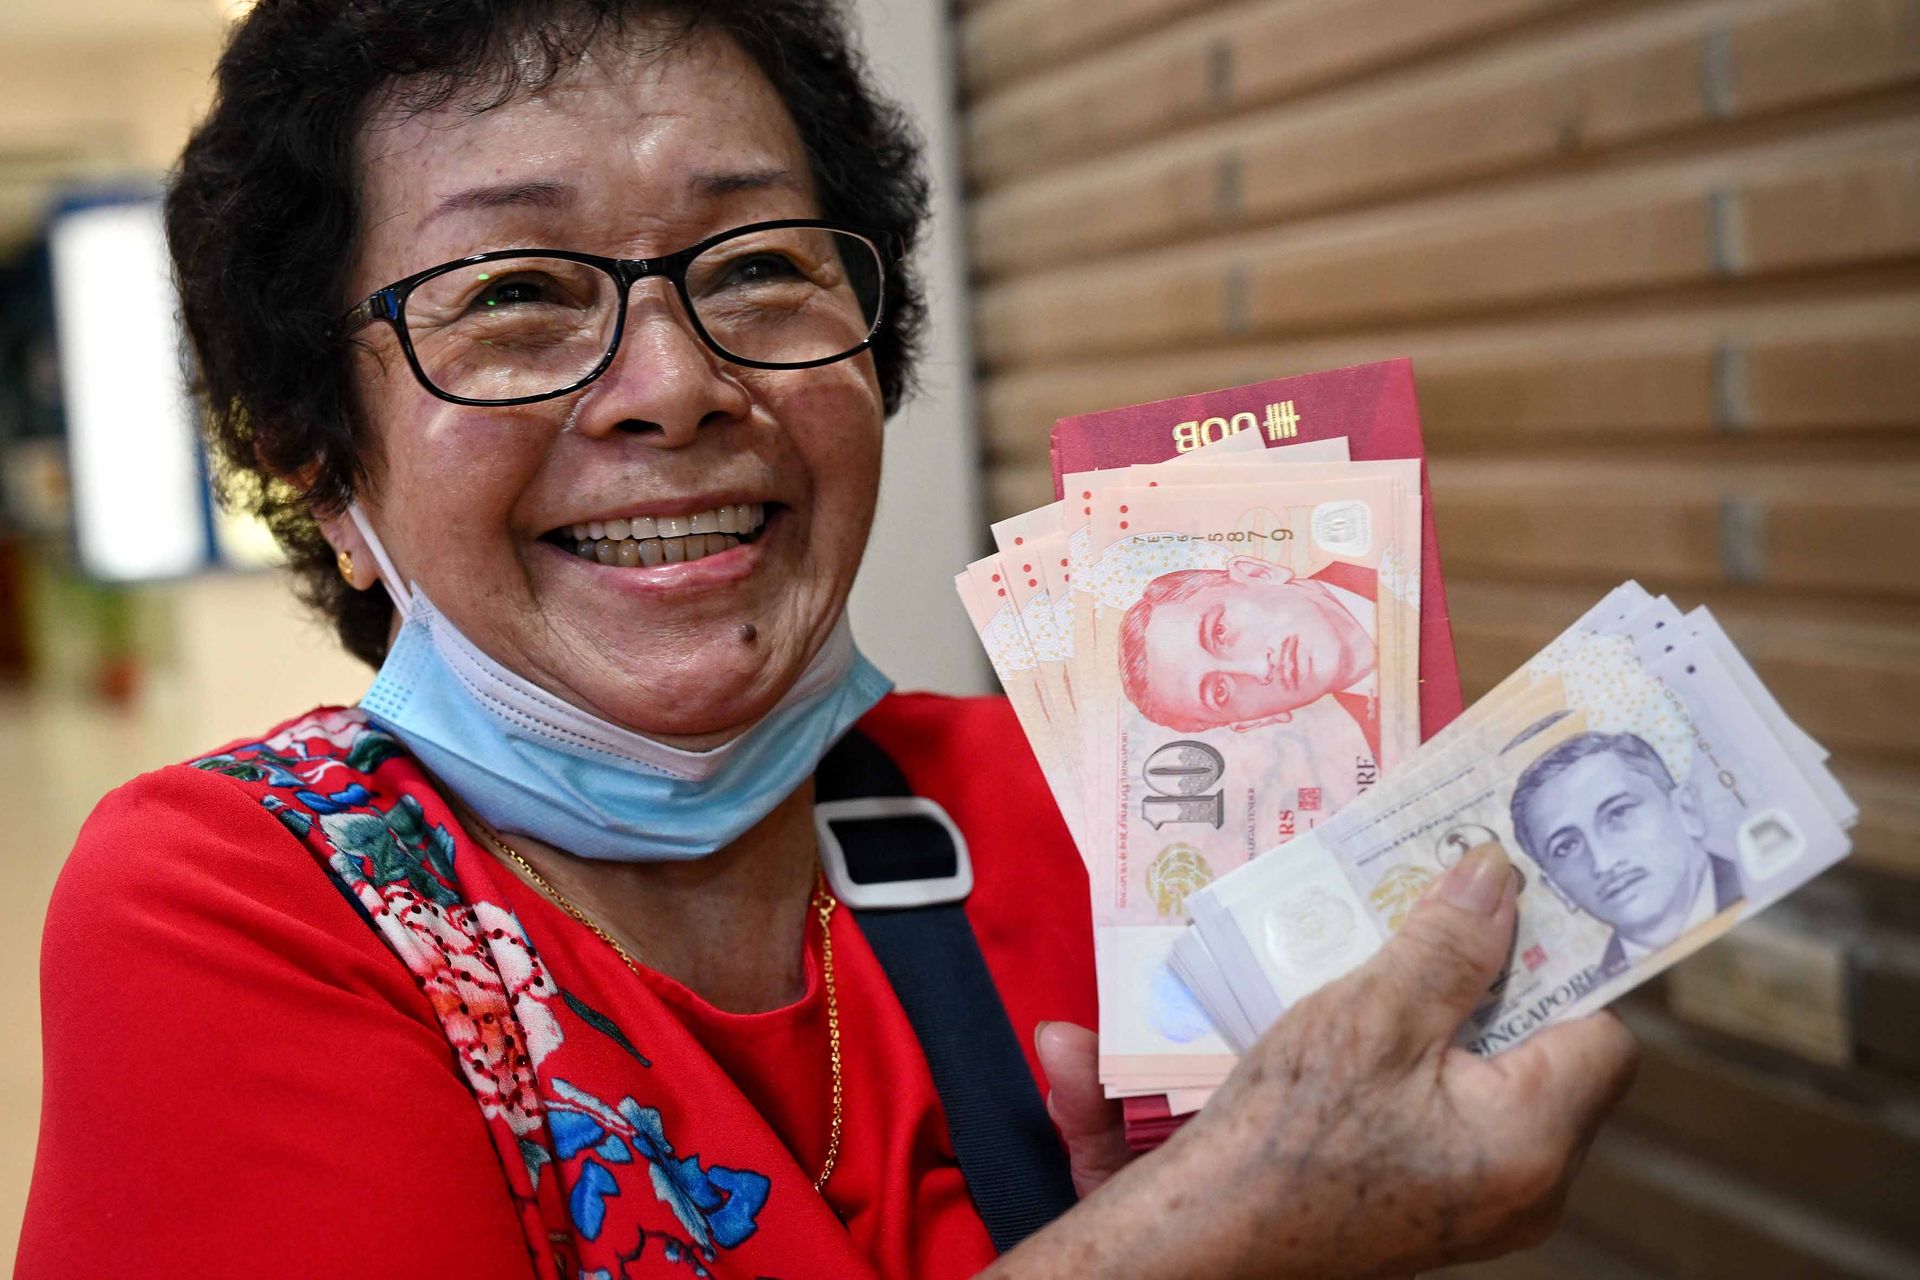 Cleaner Wong Gim Moy, 78, was one of the first few in line at UOB Rochor branch to withdraw new notes for gifting during Chinese New Year.